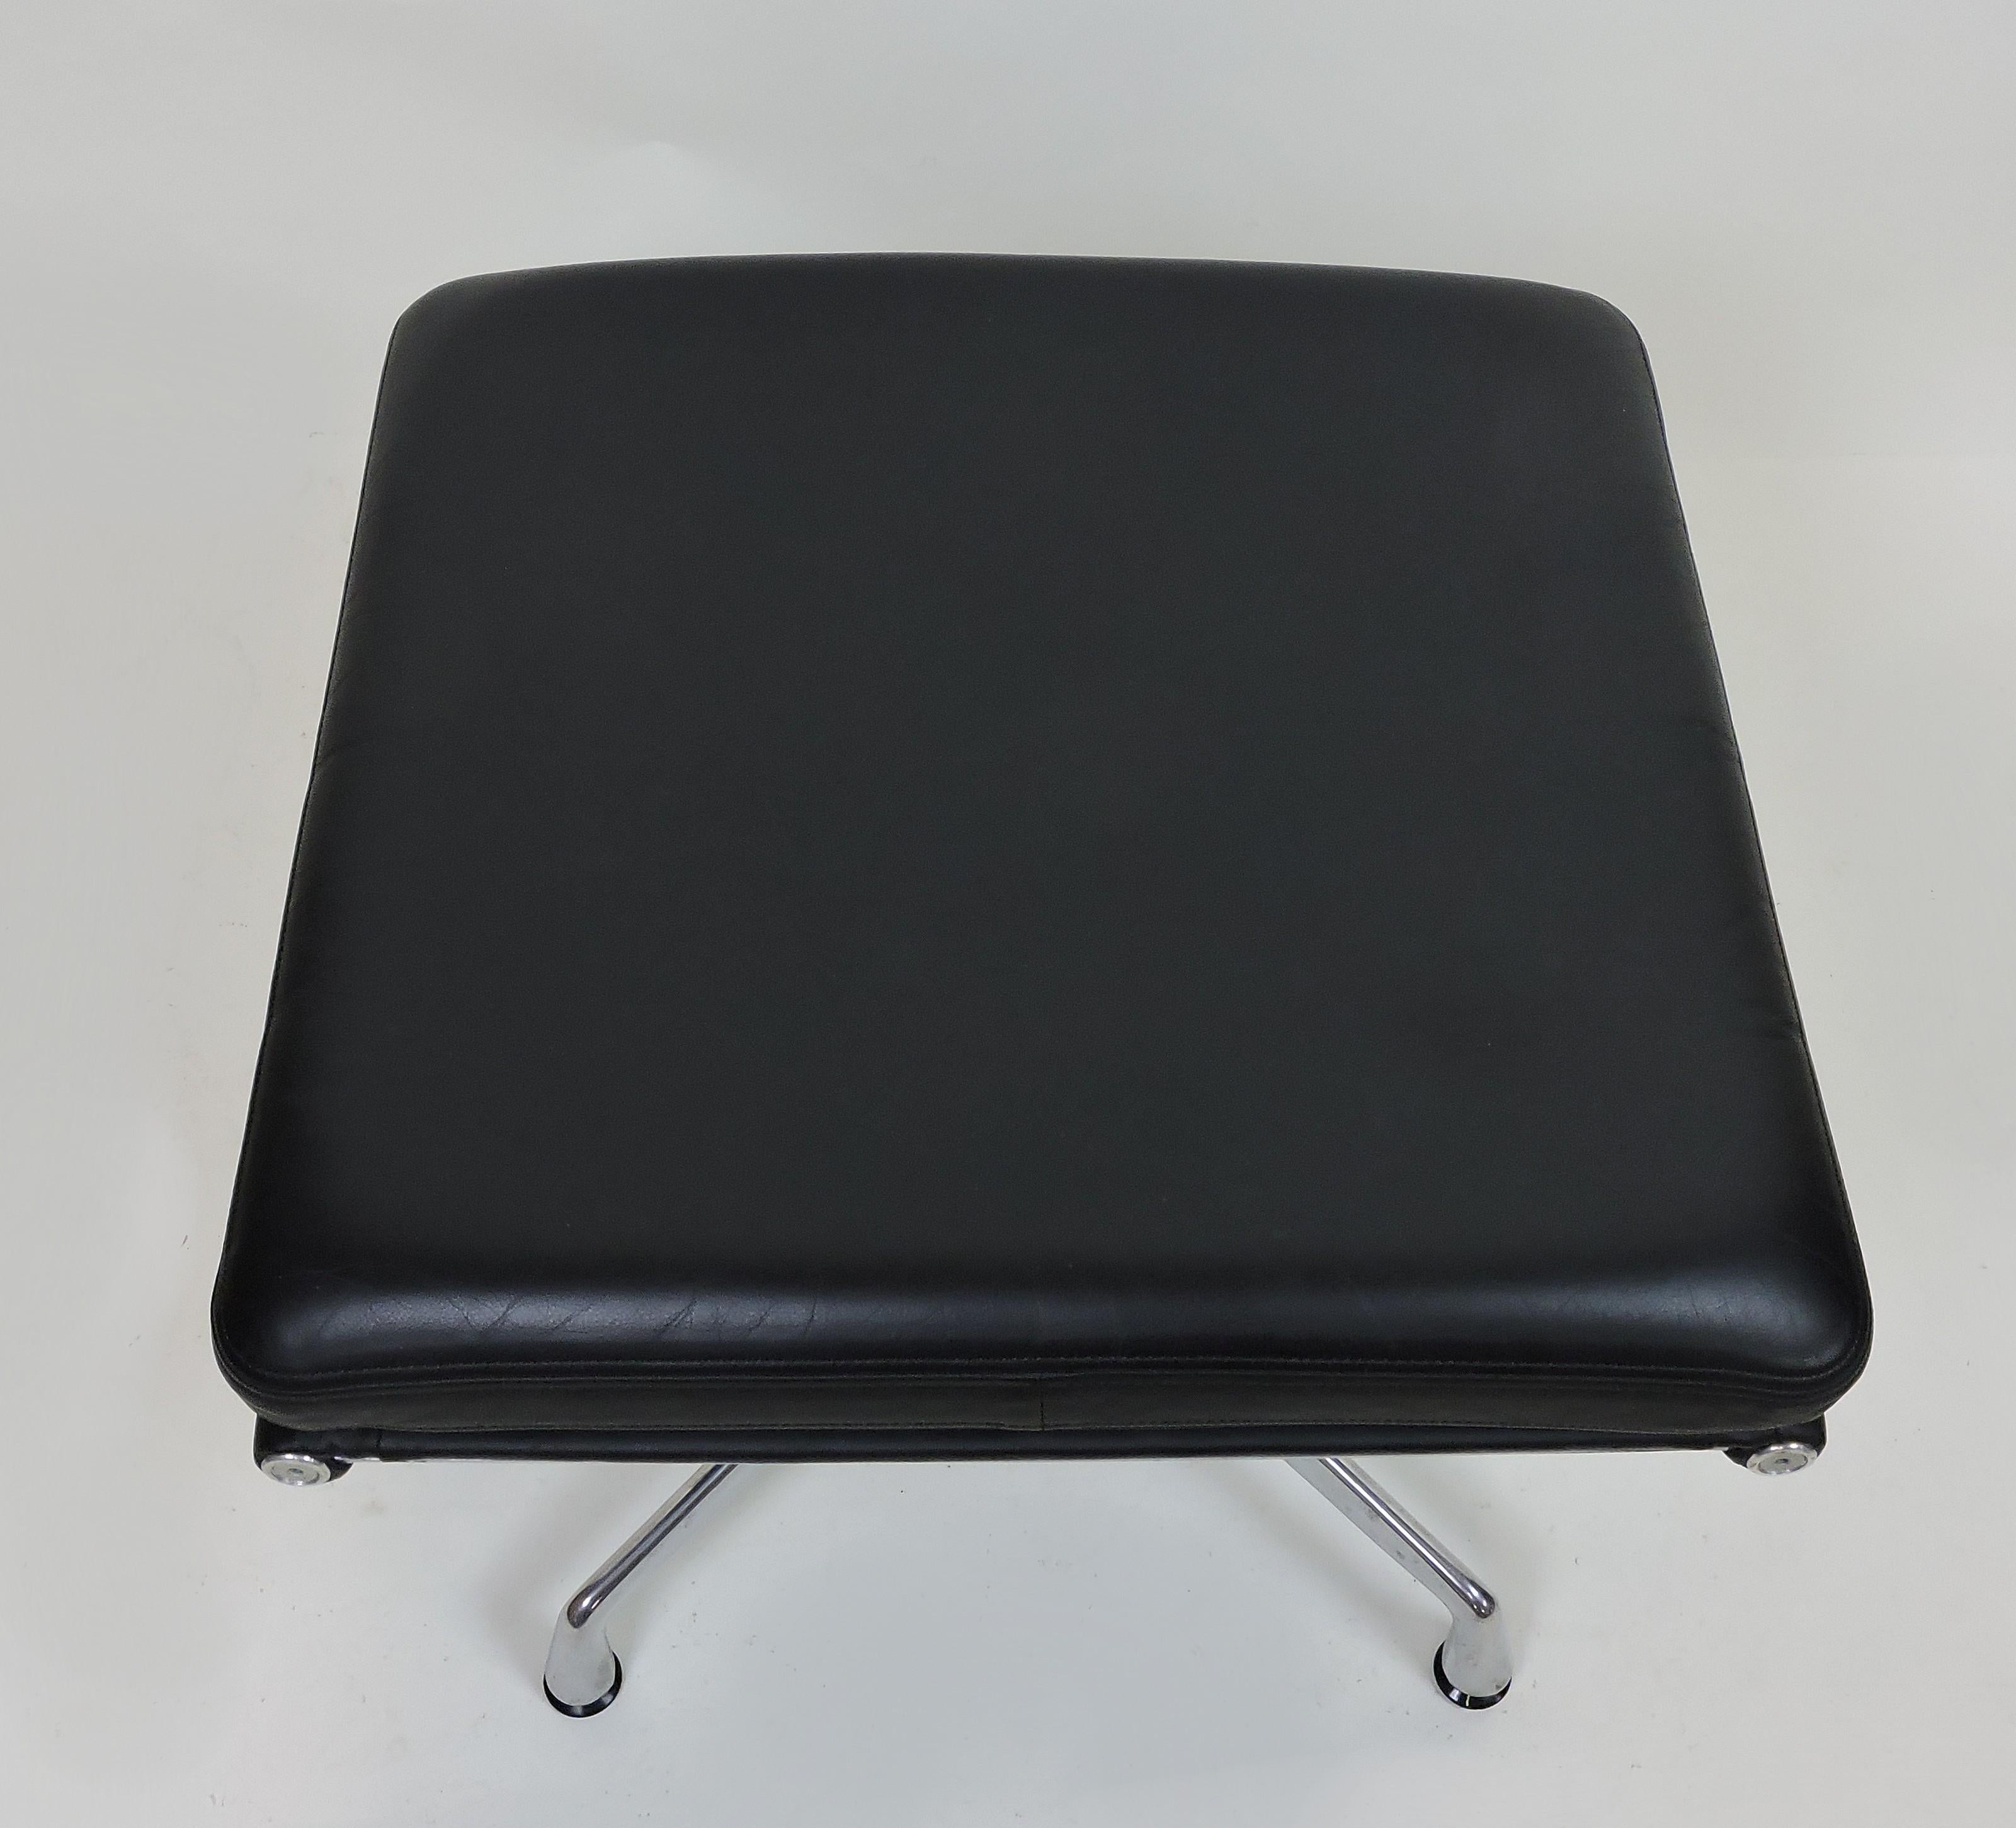 Contemporary Eames Herman Miller Soft Pad Aluminum Group Leather Foot Stool Ottoman